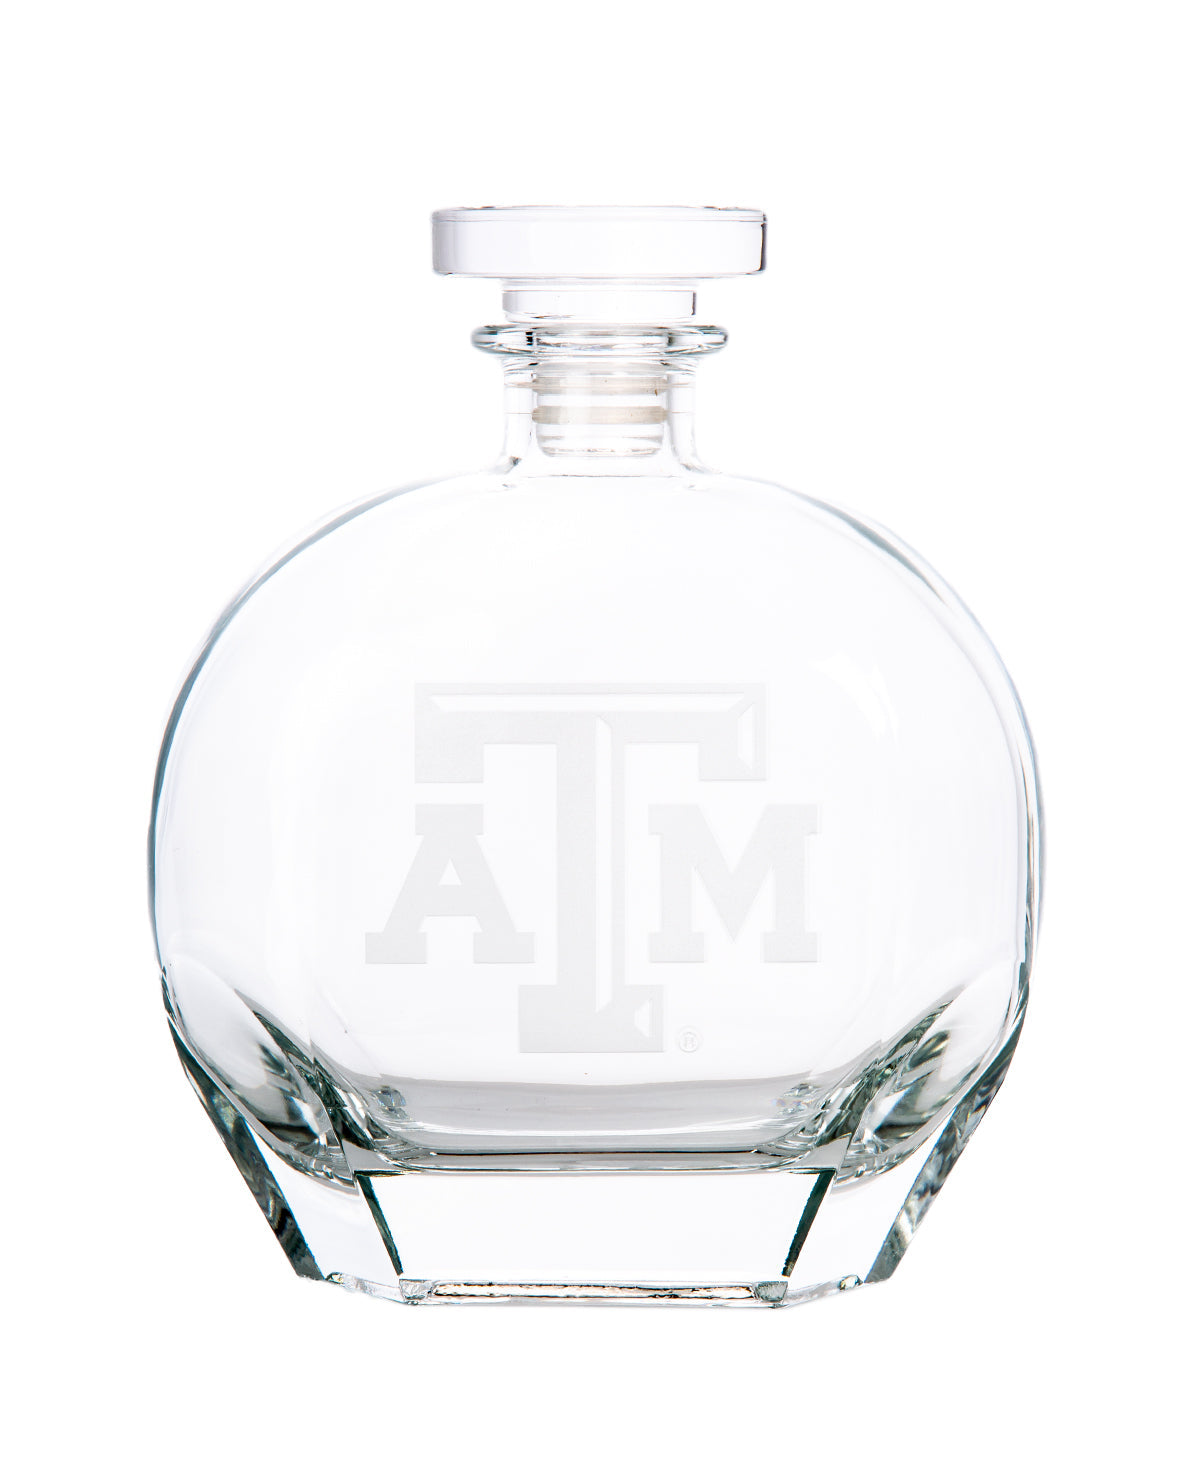 Texas A&M Campus Crystal Puccini Decanter